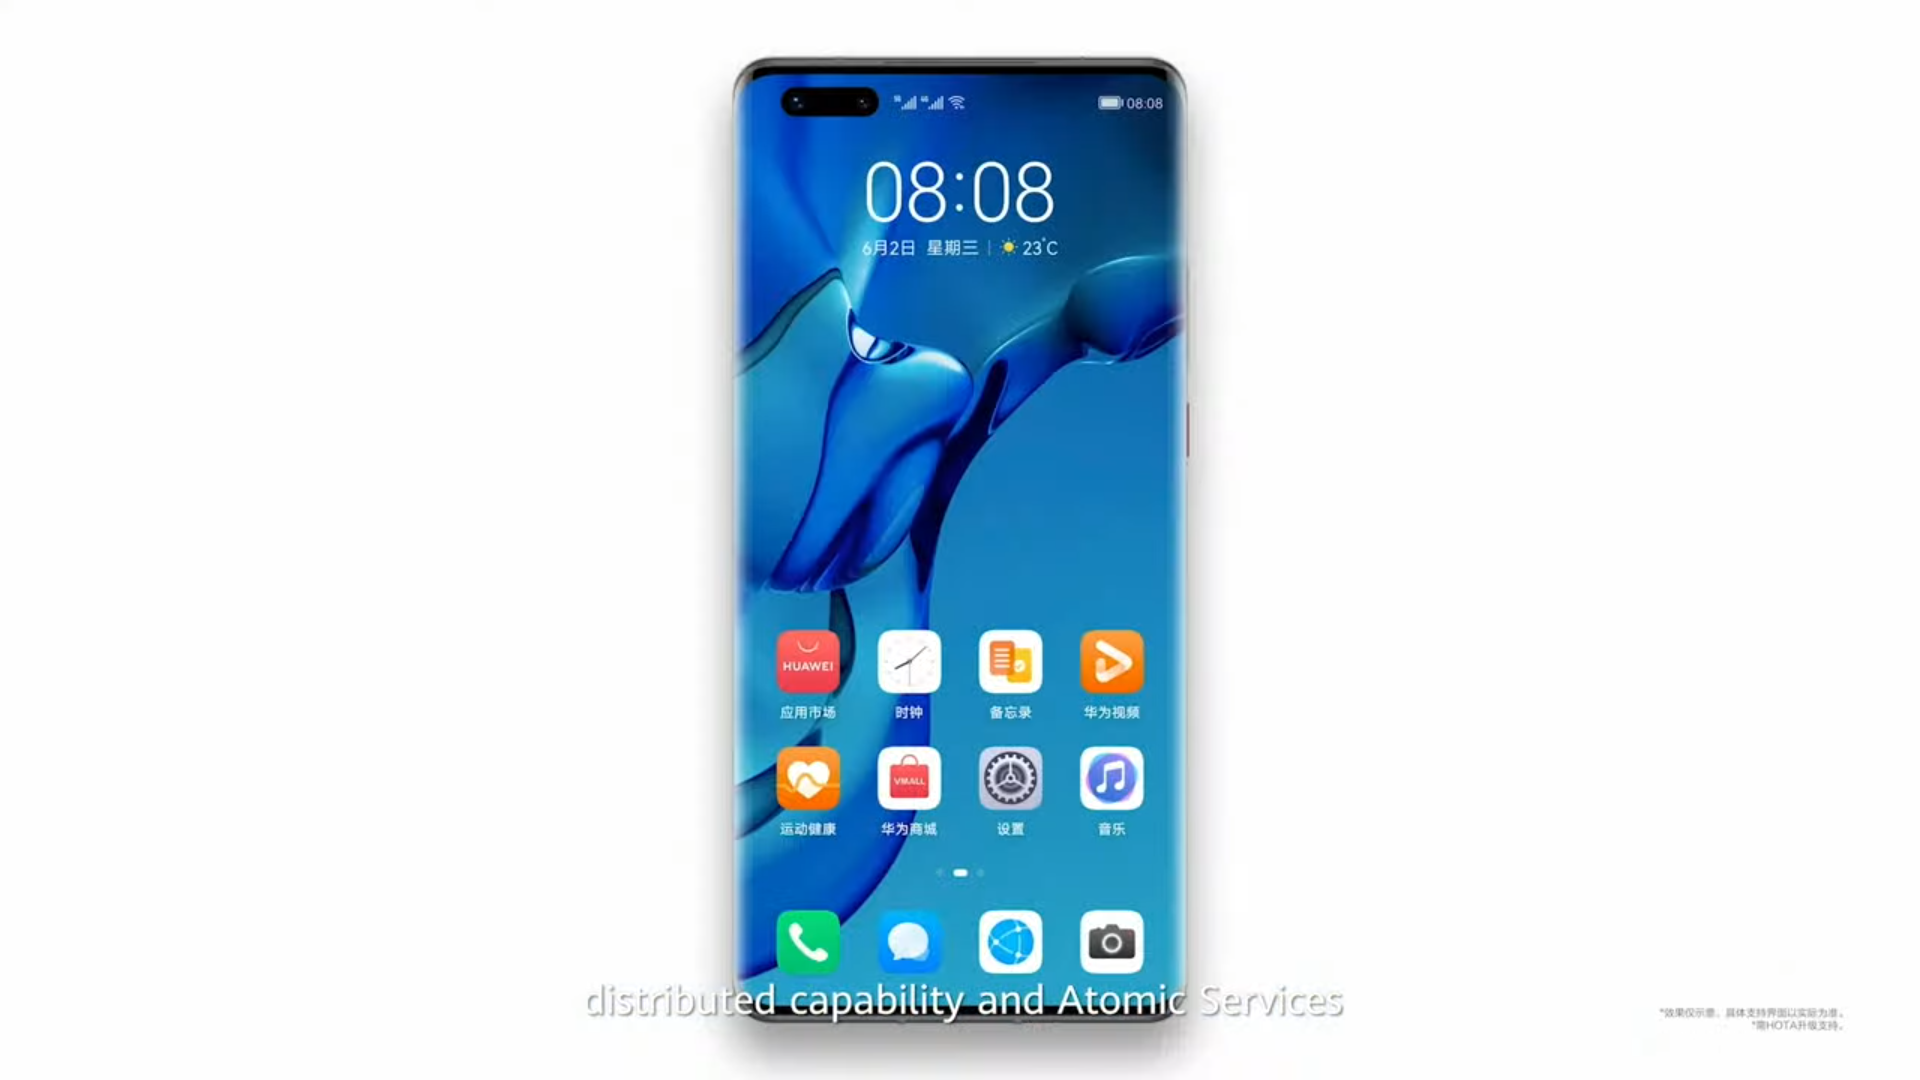 huawei android phones